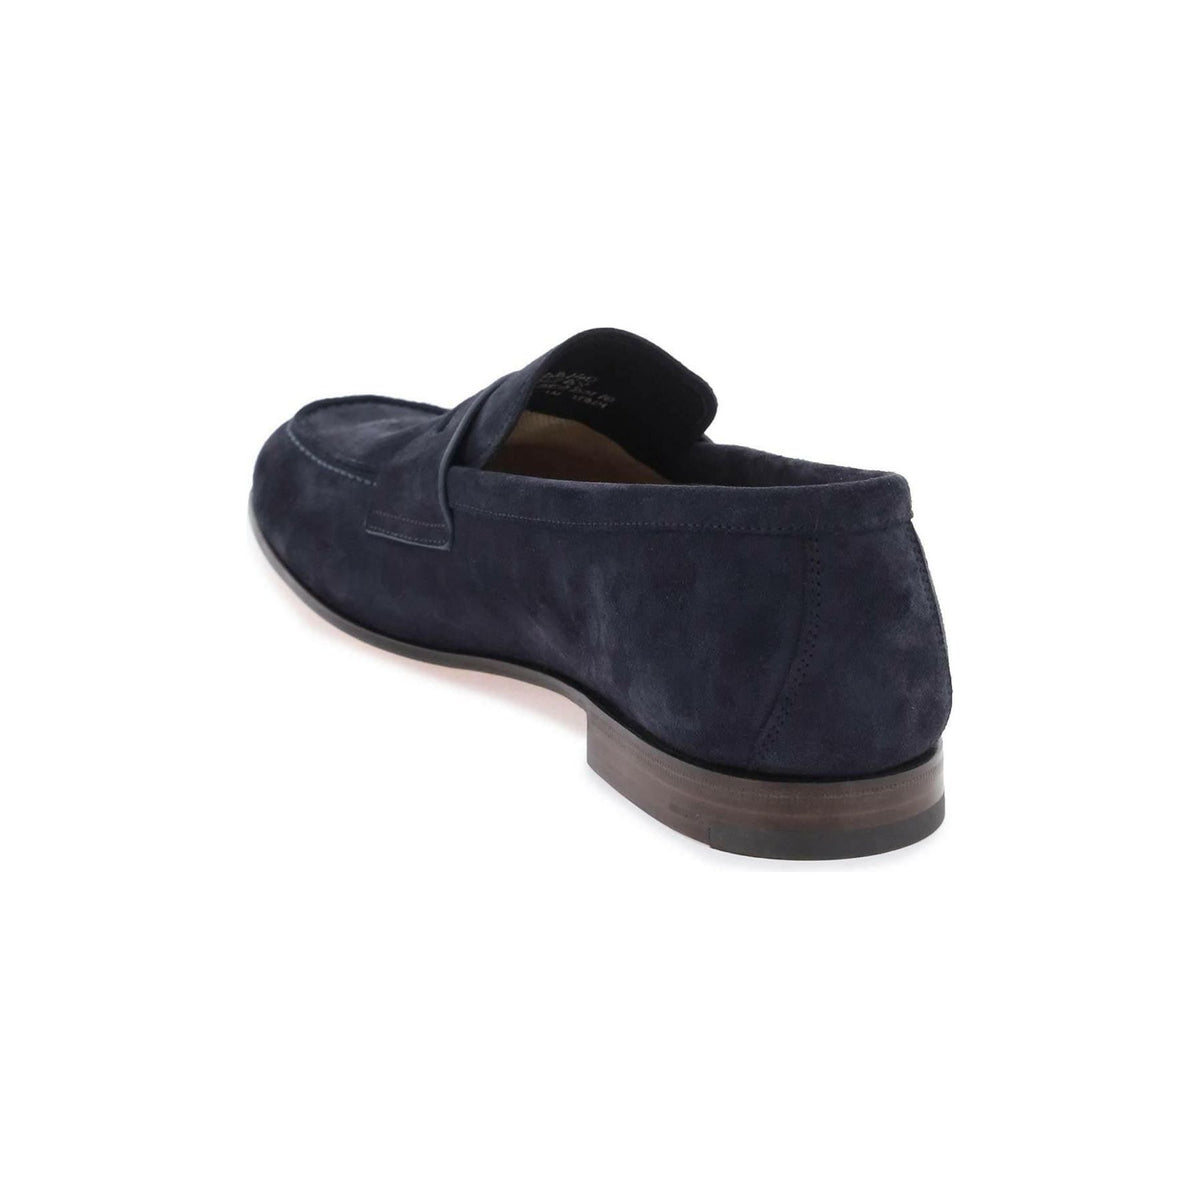 CHURCH'S - Navy Maltby Soft Suede Loafers - JOHN JULIA